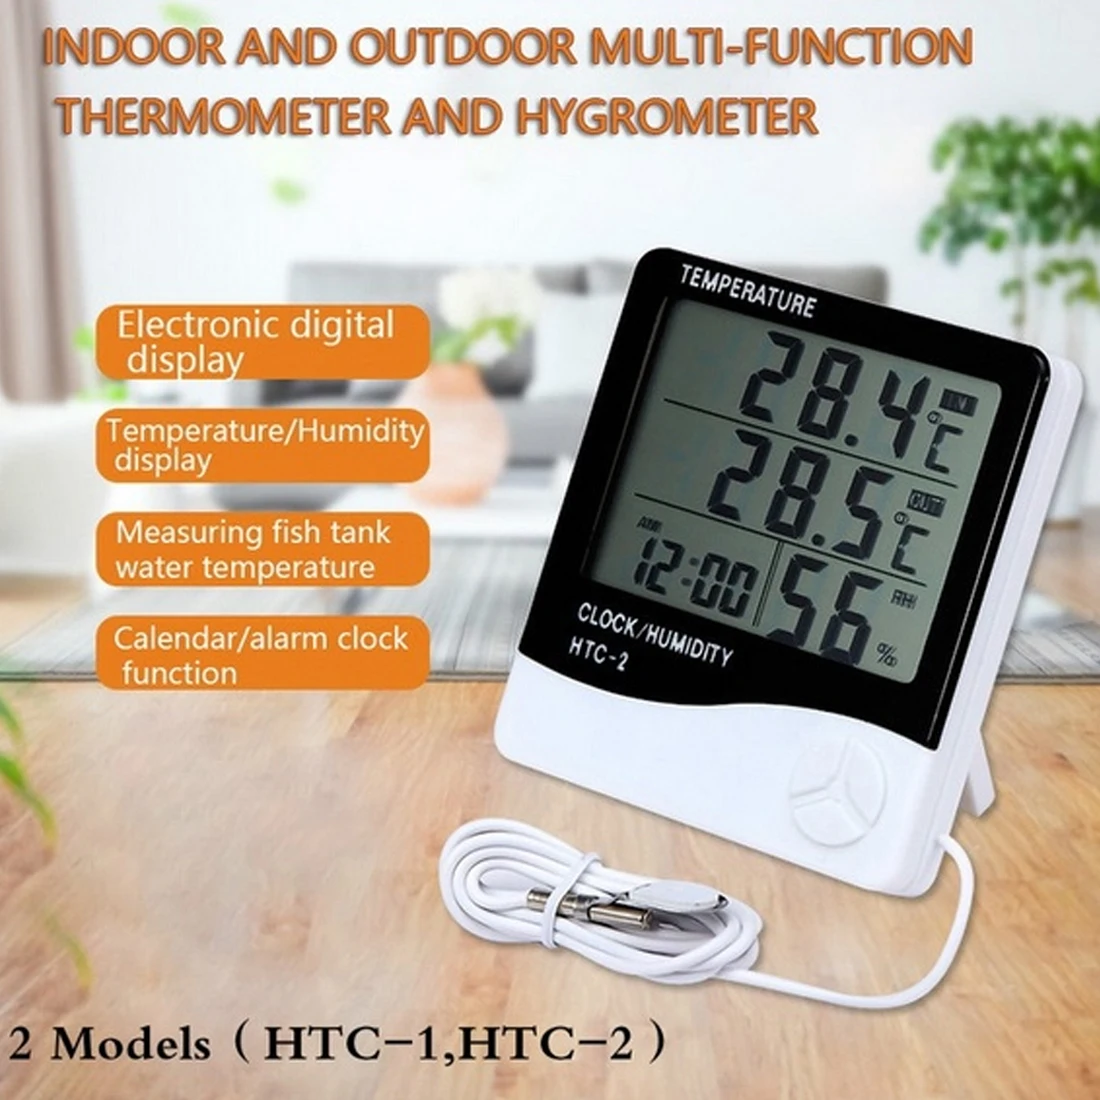 Home Digital Thermometer Hygrometer LCD Electronic Temperature Humidity Meter Thermometer Hygrometer Weather Station Alarm Clock lcd digital temperature humidity meter barometer desk alarm clock moon phase colorful weather forecast wireless weather station